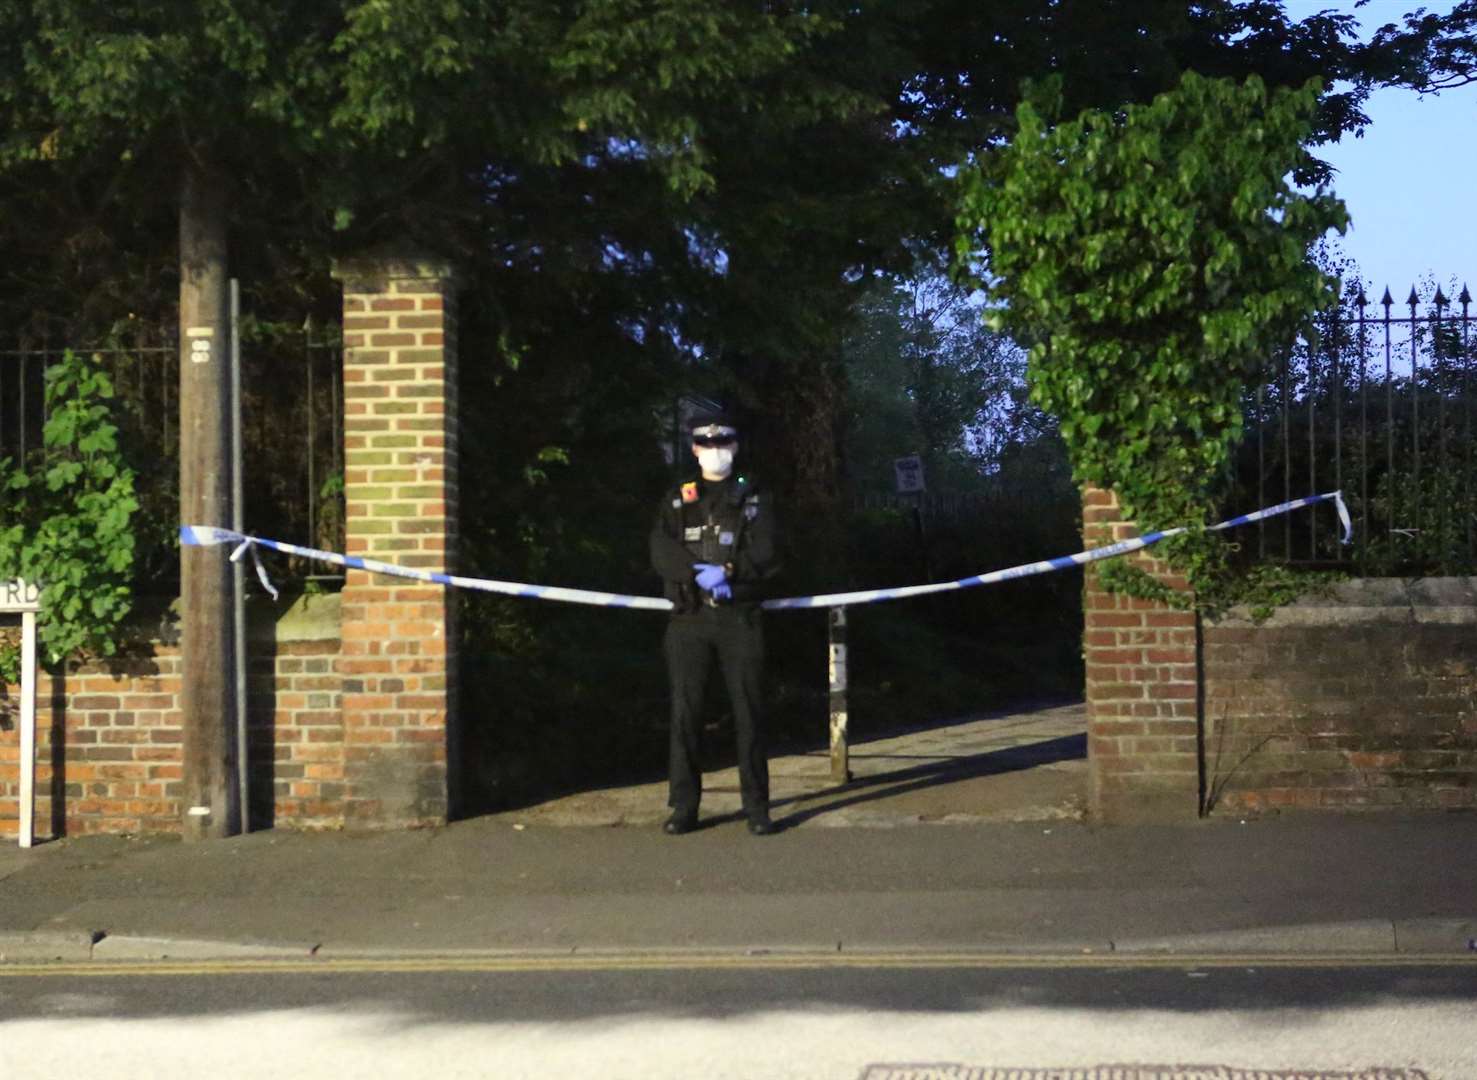 Police sealed off the park after the attack. Picture: UKNIP